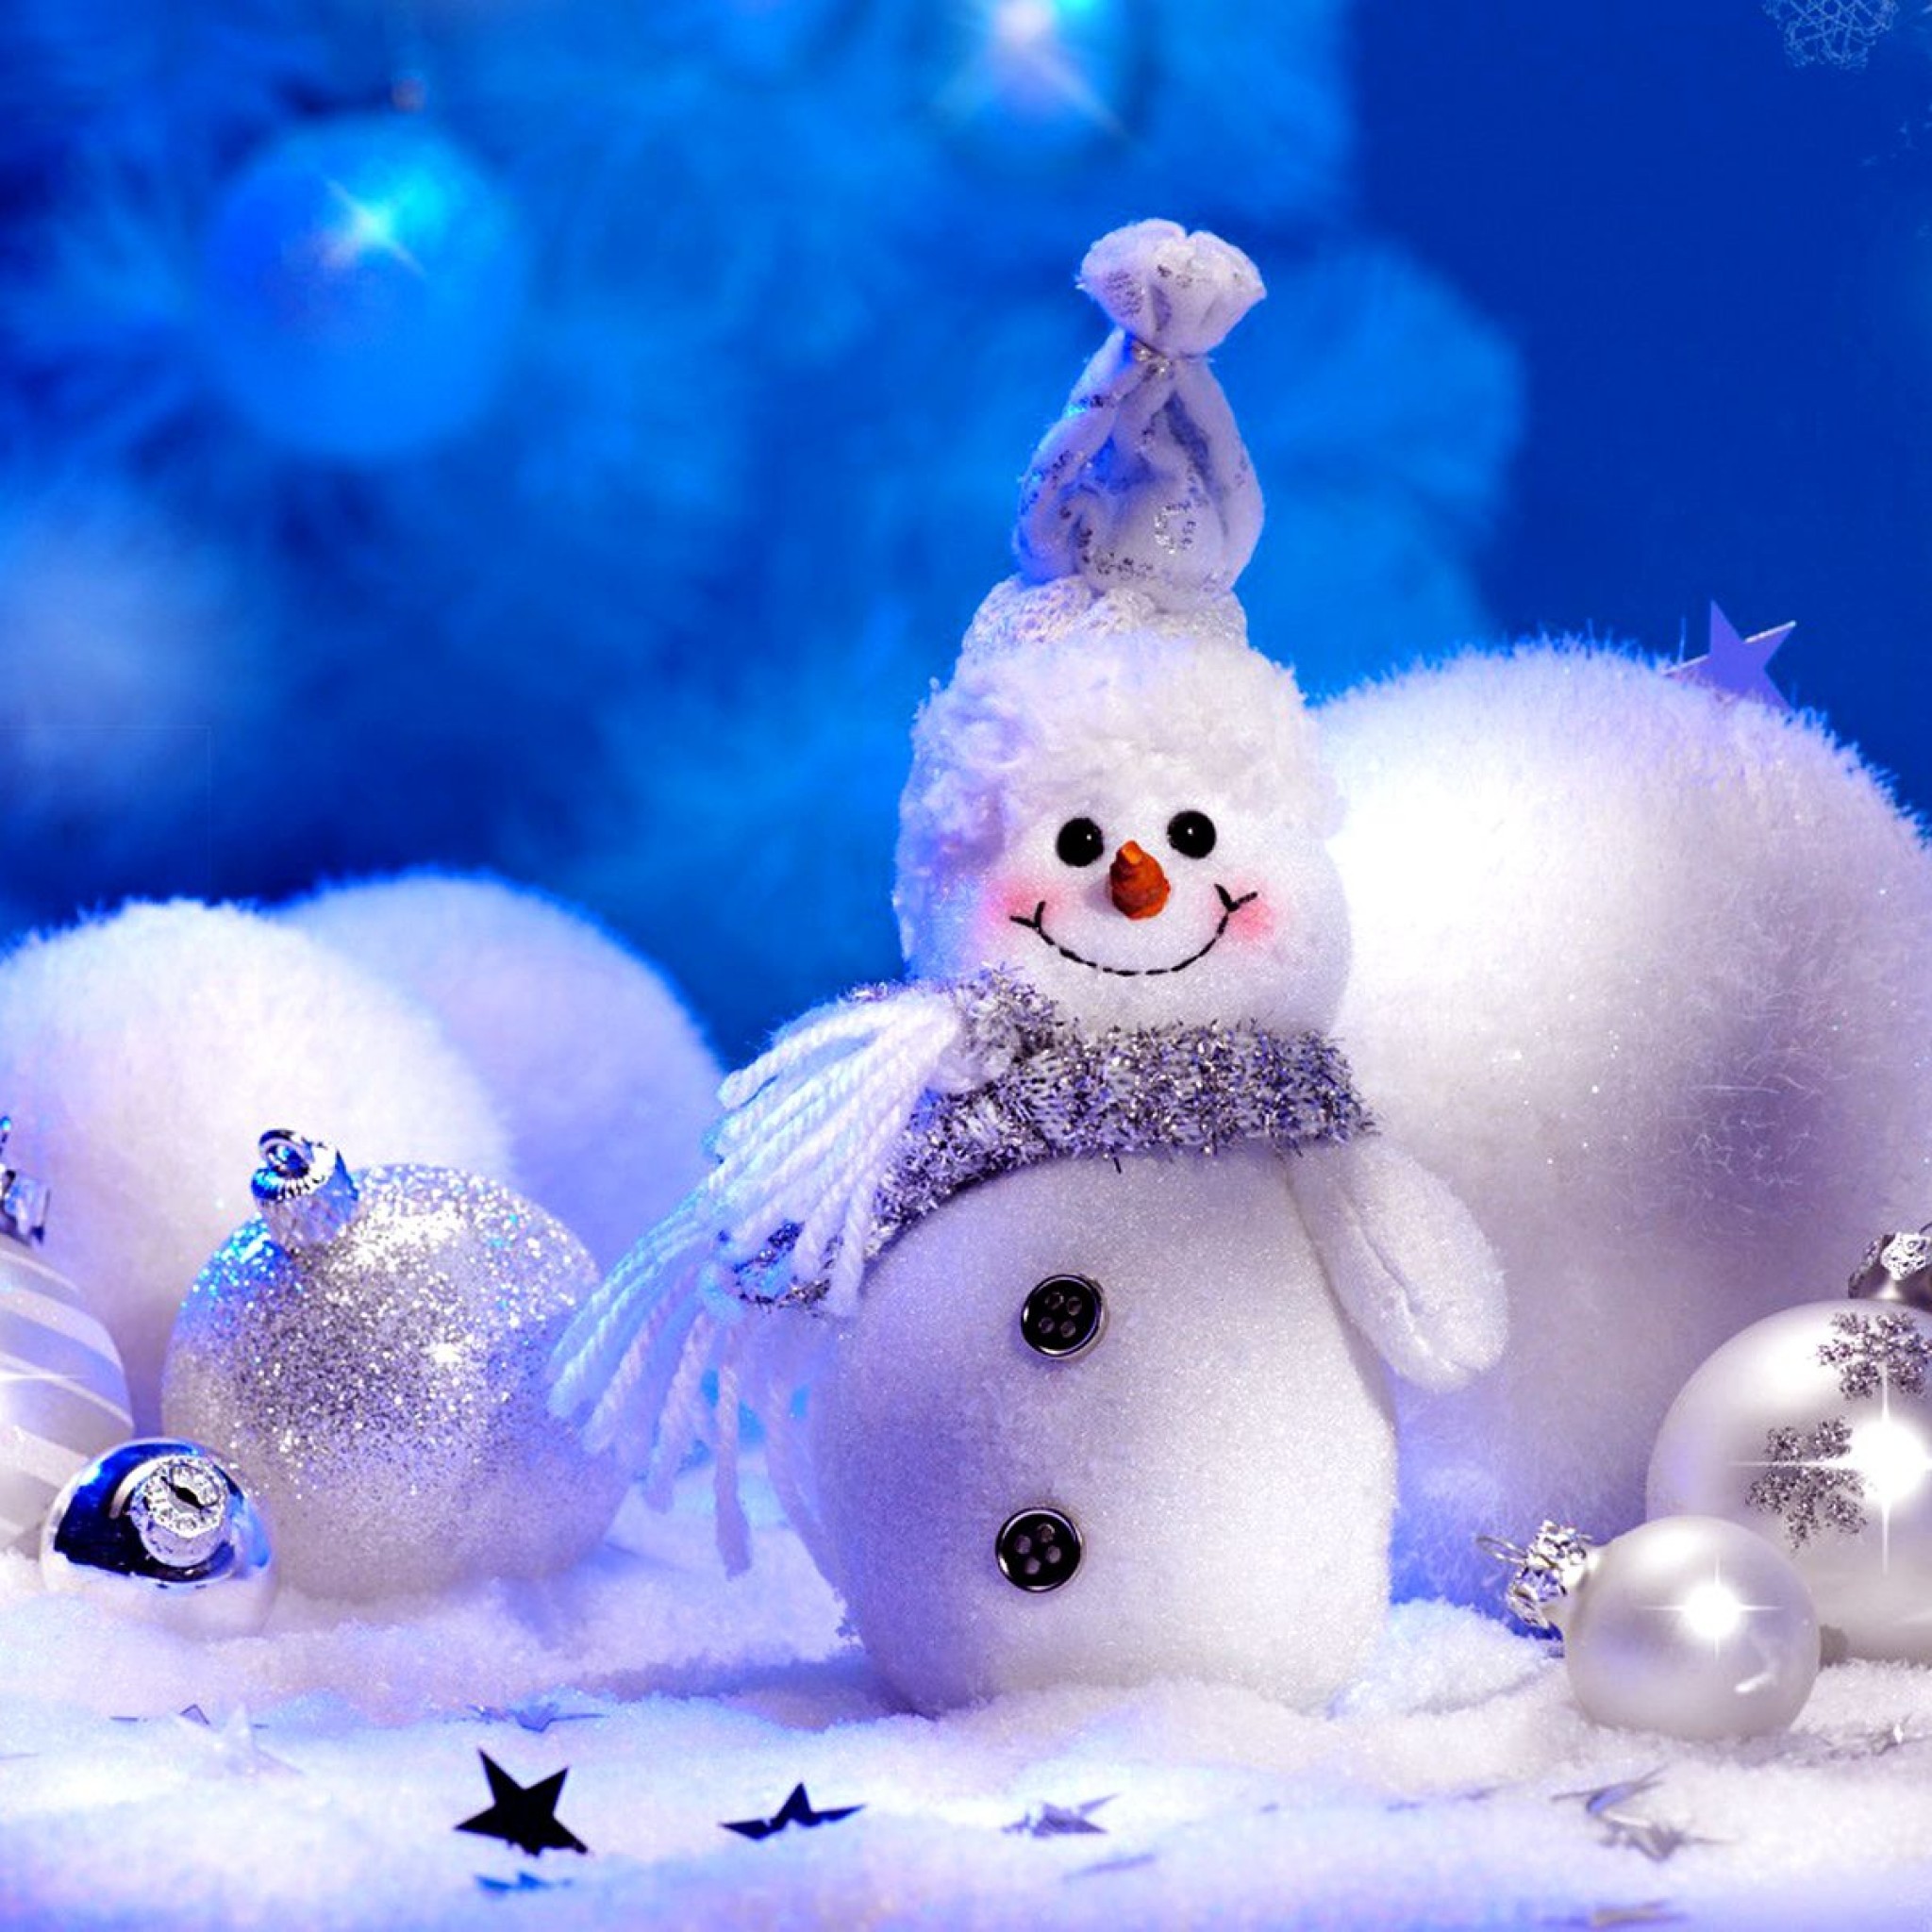 A snowman is sitting in front of some christmas decorations - Christmas